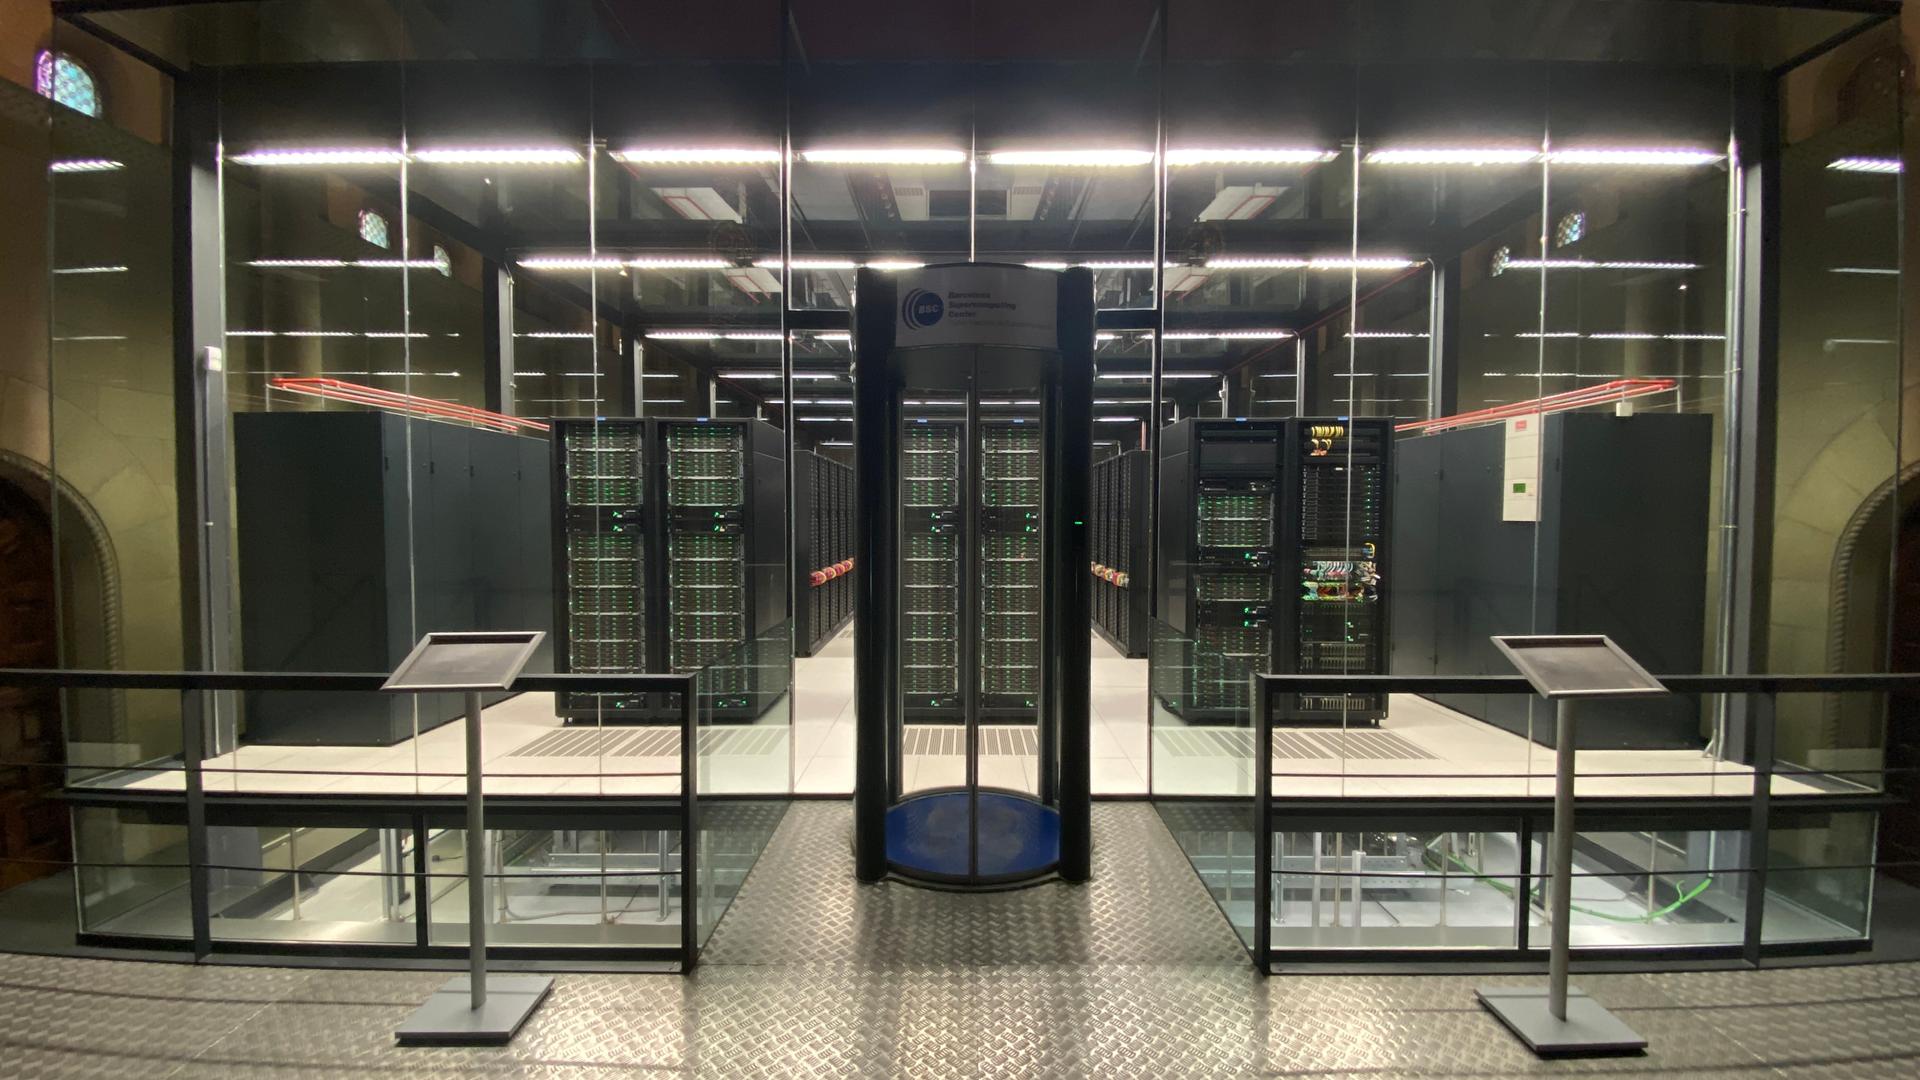 Barcelona’s MareNostrum 4 supercomputer is one of the fastest in the world